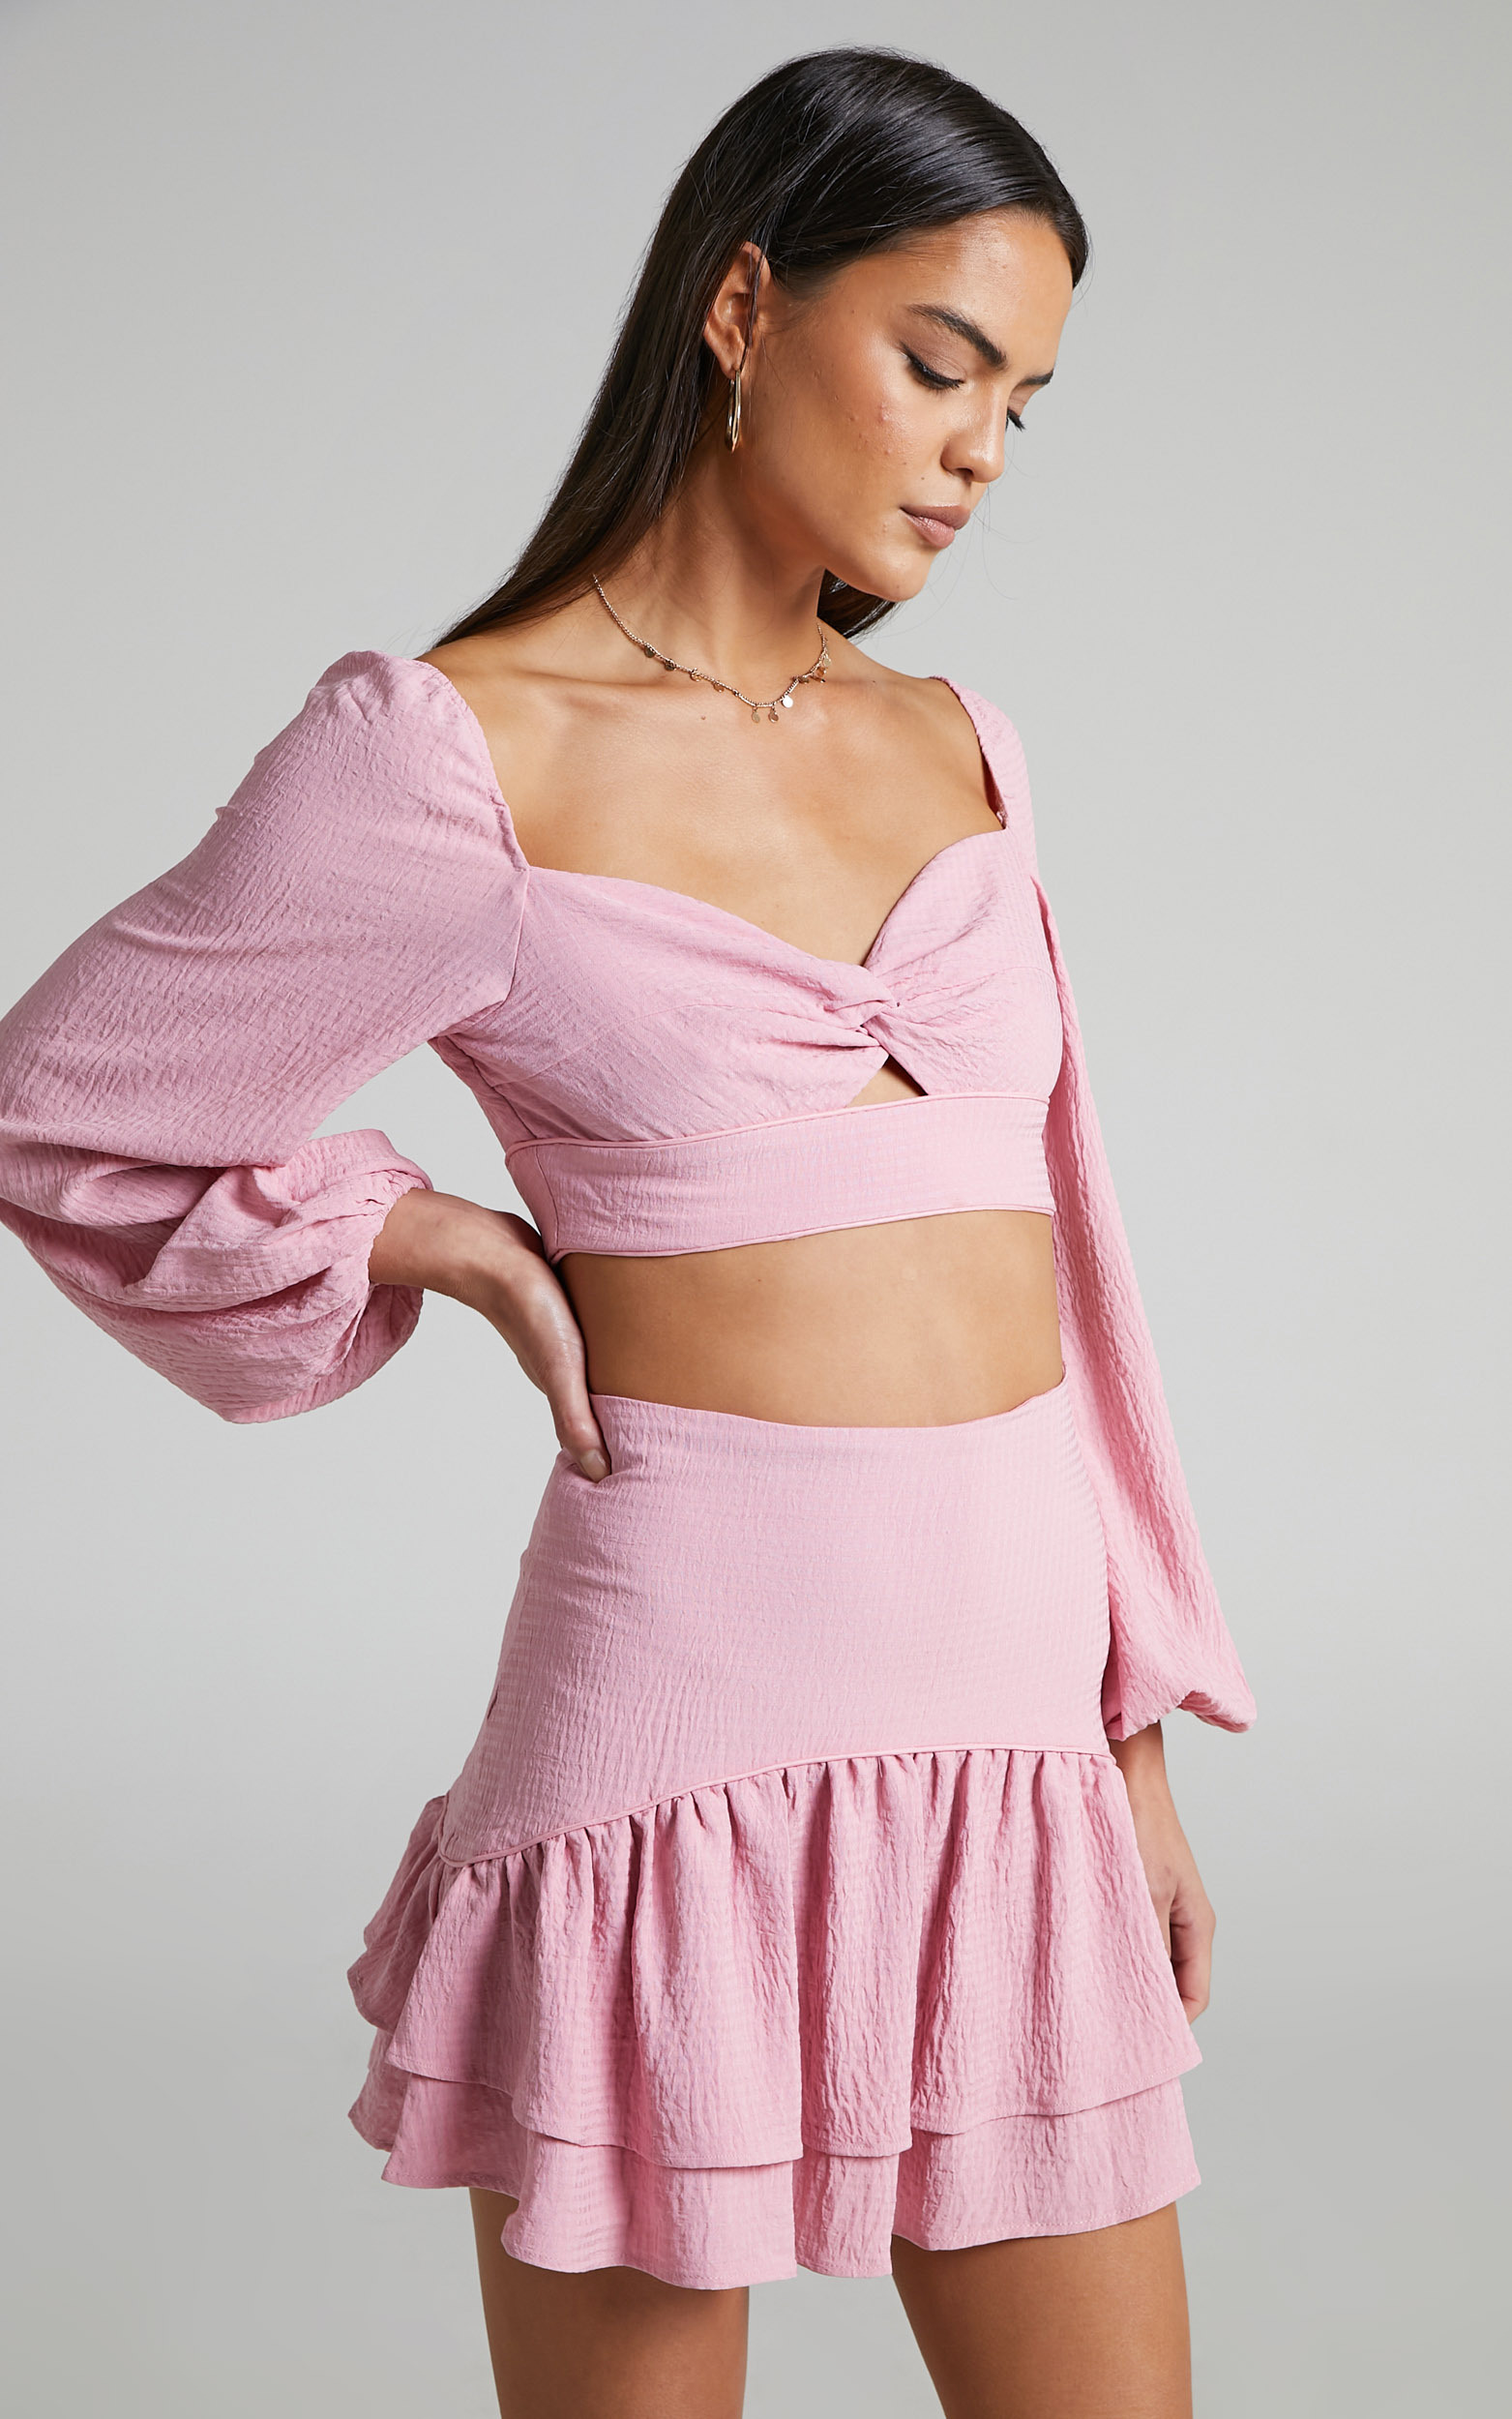 Razille Twist Front Long Sleeve Crop Top and Mini Skirt Two Piece Set in Pink - 04, PNK1, hi-res image number null